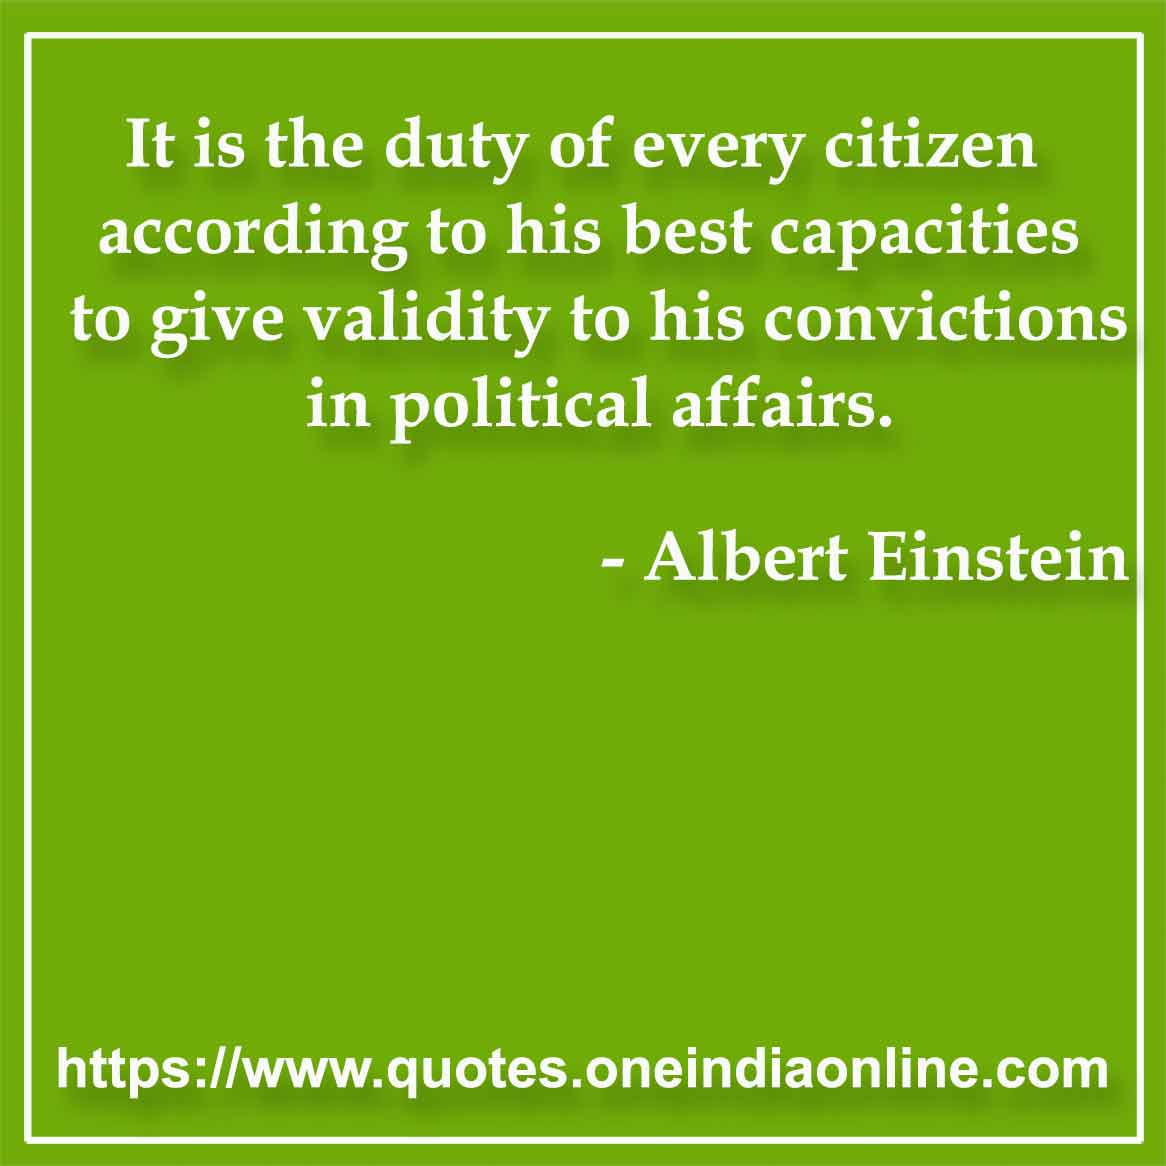 It is the duty of every citizen according to his best capacities to give validity to his convictions in political affairs.

- Political Quotes by Albert Einstein